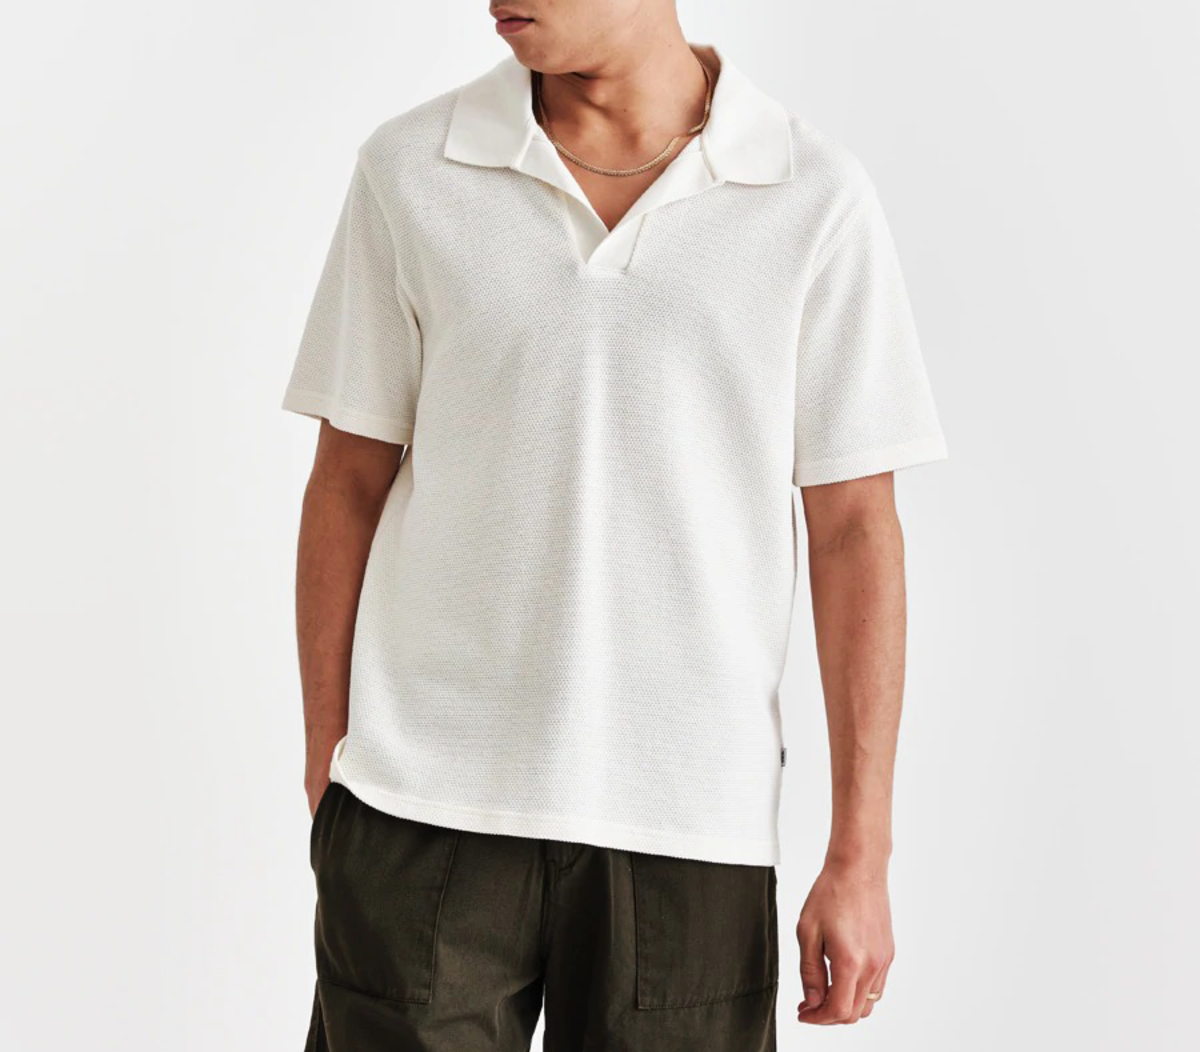 The Score: Wax London's Luxe, Laidback Polo Shirt Just Went On Sale ...